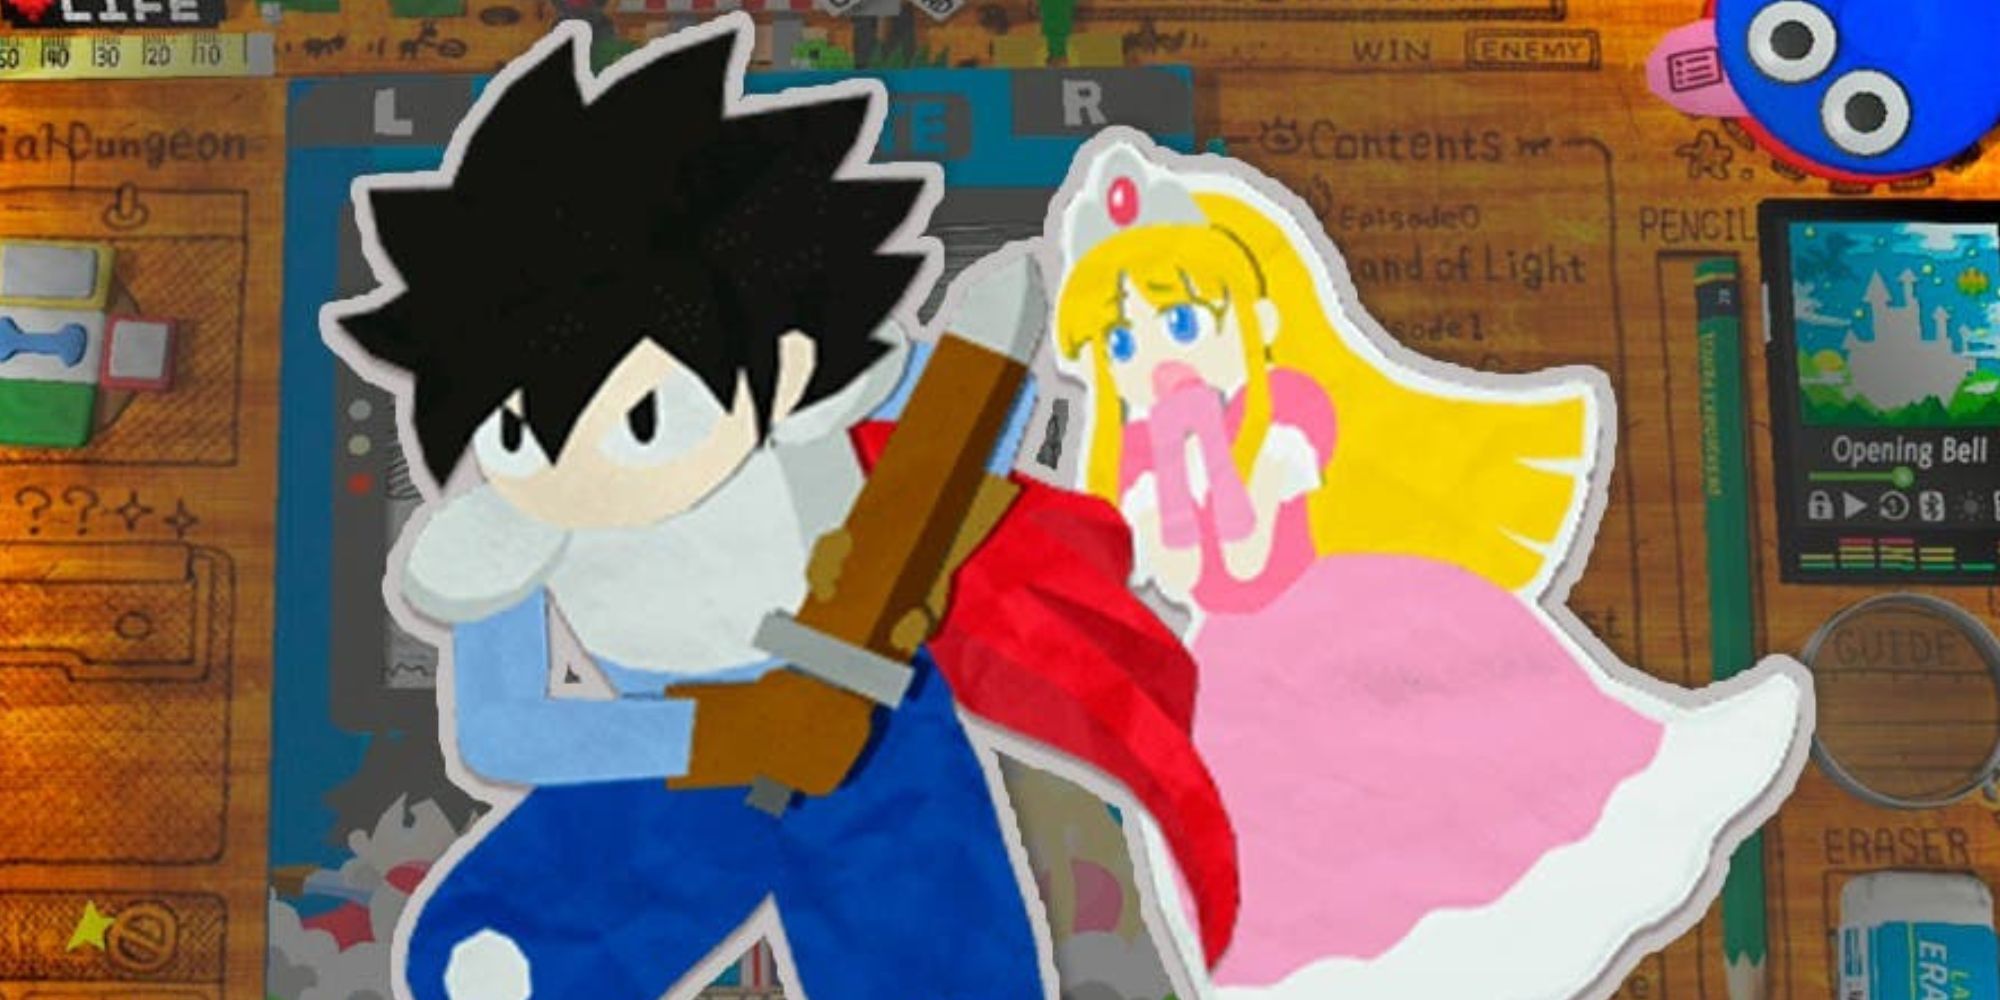 Wright and the Princess in cardboard cutout form in RPG Time: The Legend Of Wright before fighting Dethgawd